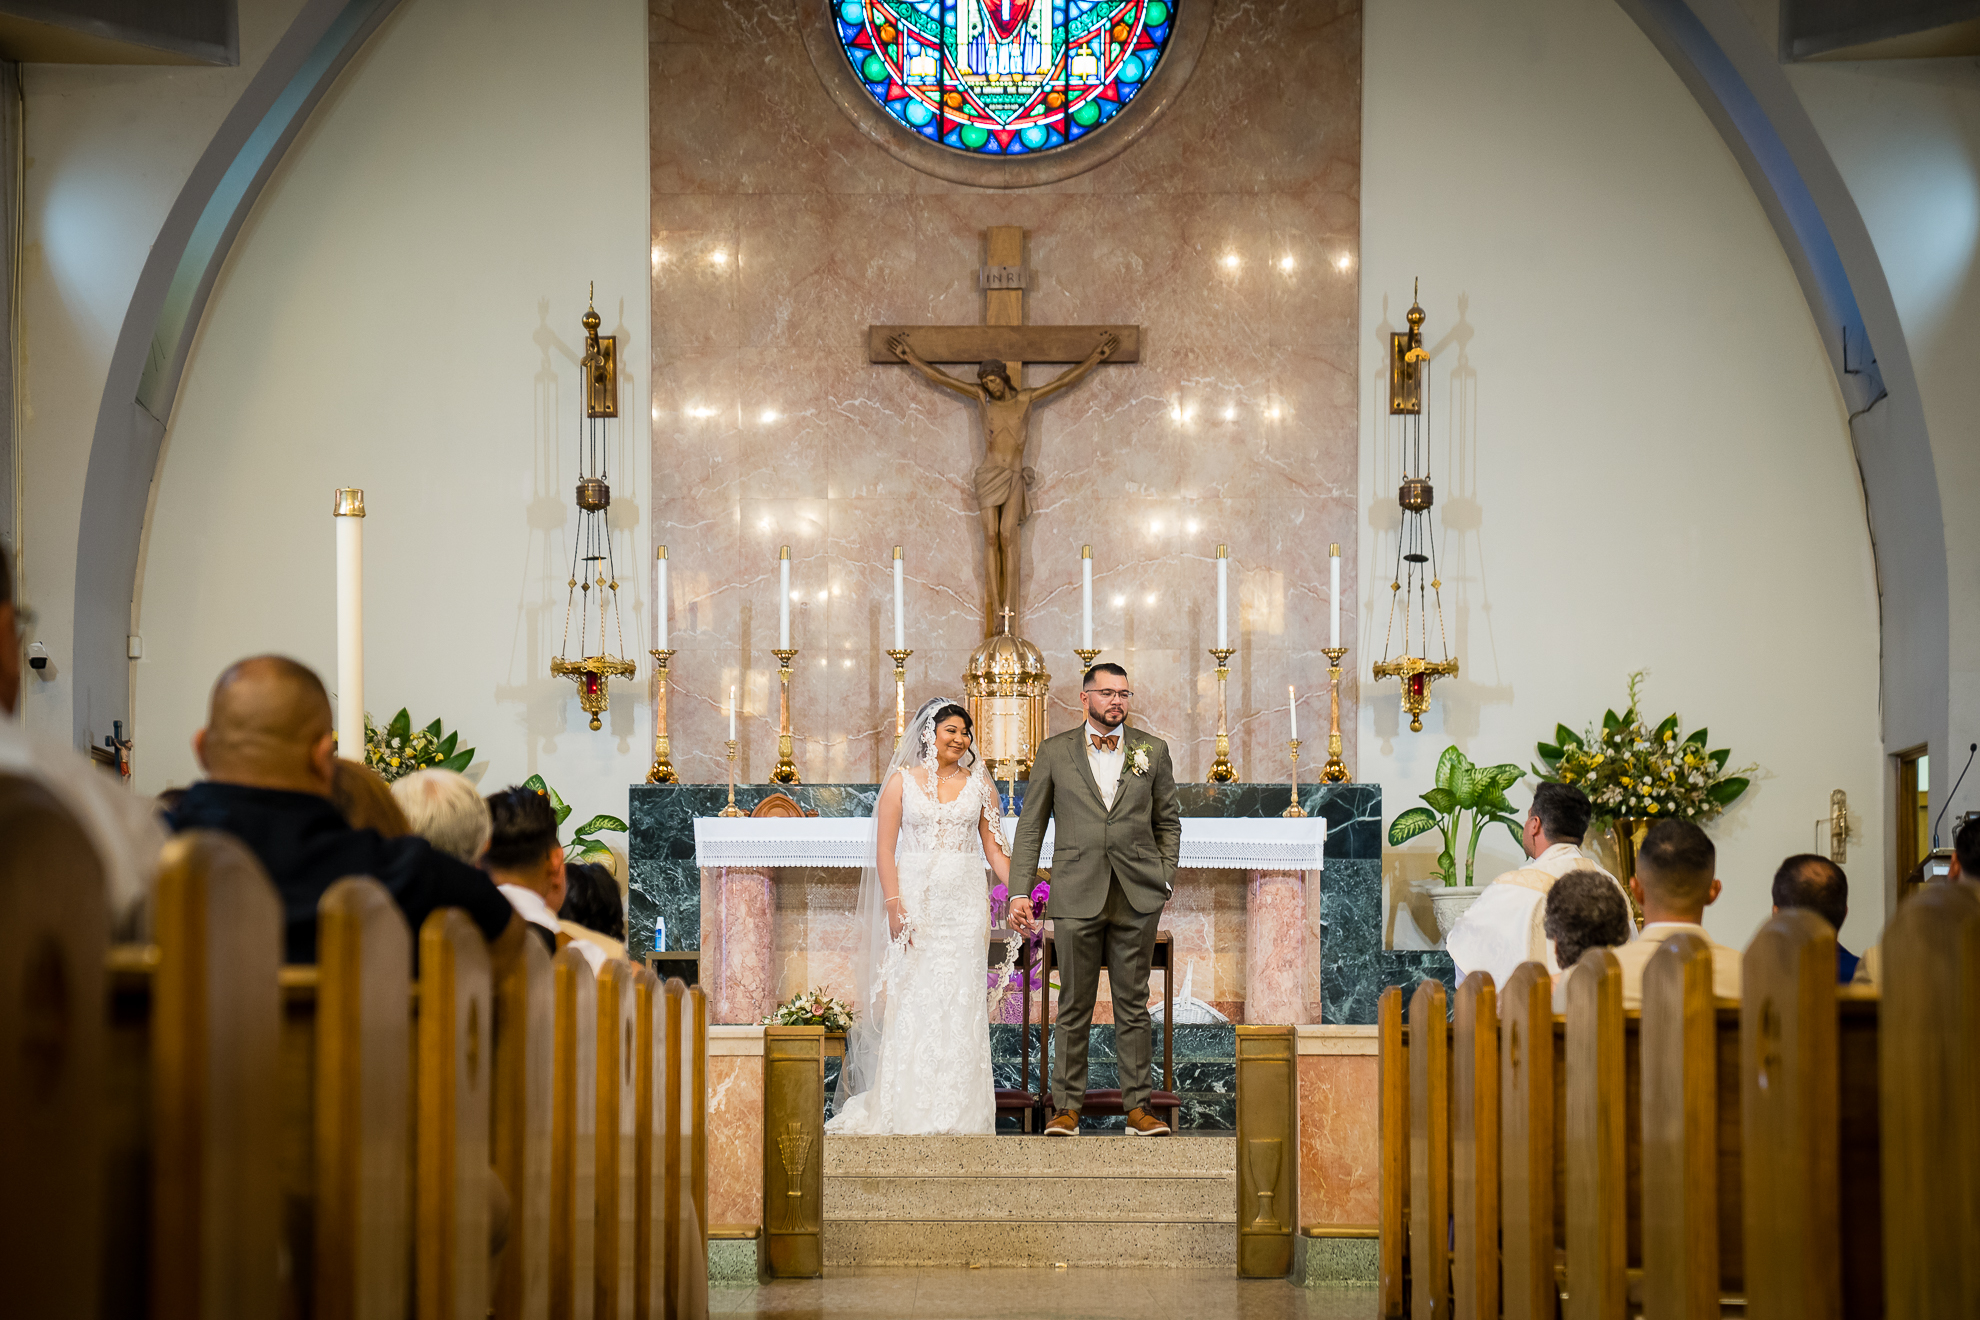 ThomasKim_photography A bride and groom standing in the Aisle of a church.